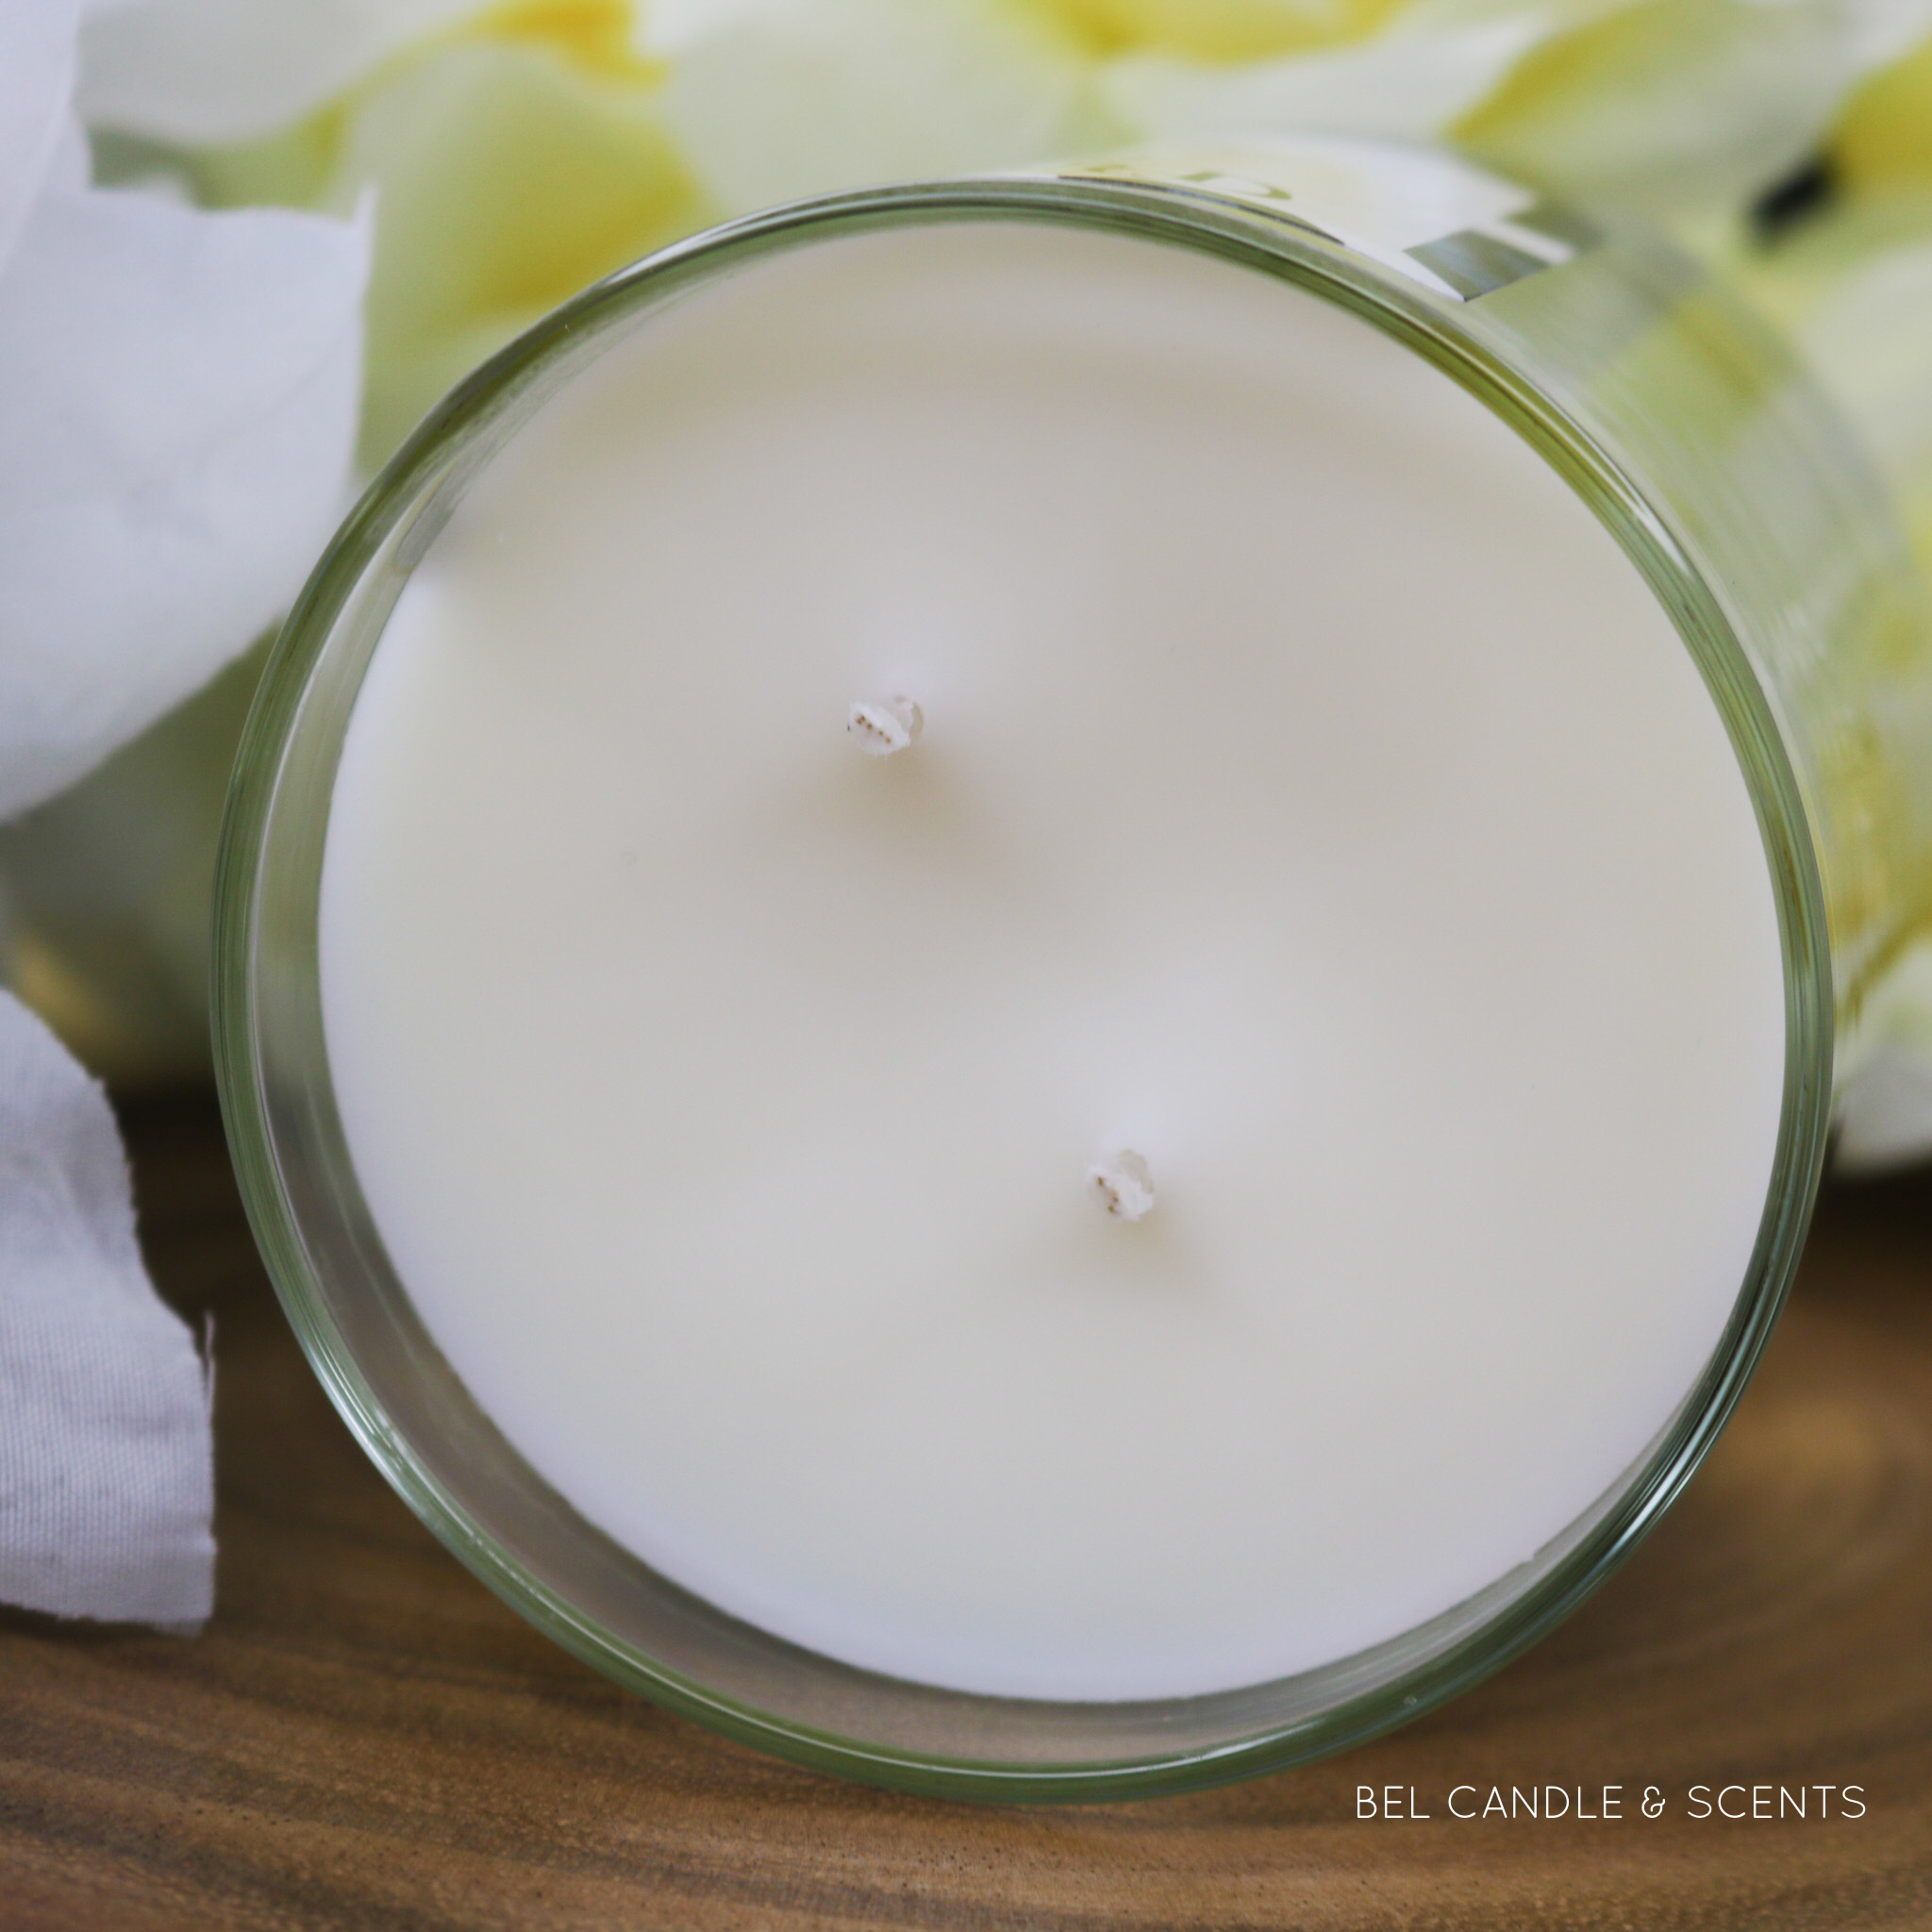 SOY/COCONUT SCENTED CANDLE  MORNING BLISS I BEL CANDLE & SCENTS